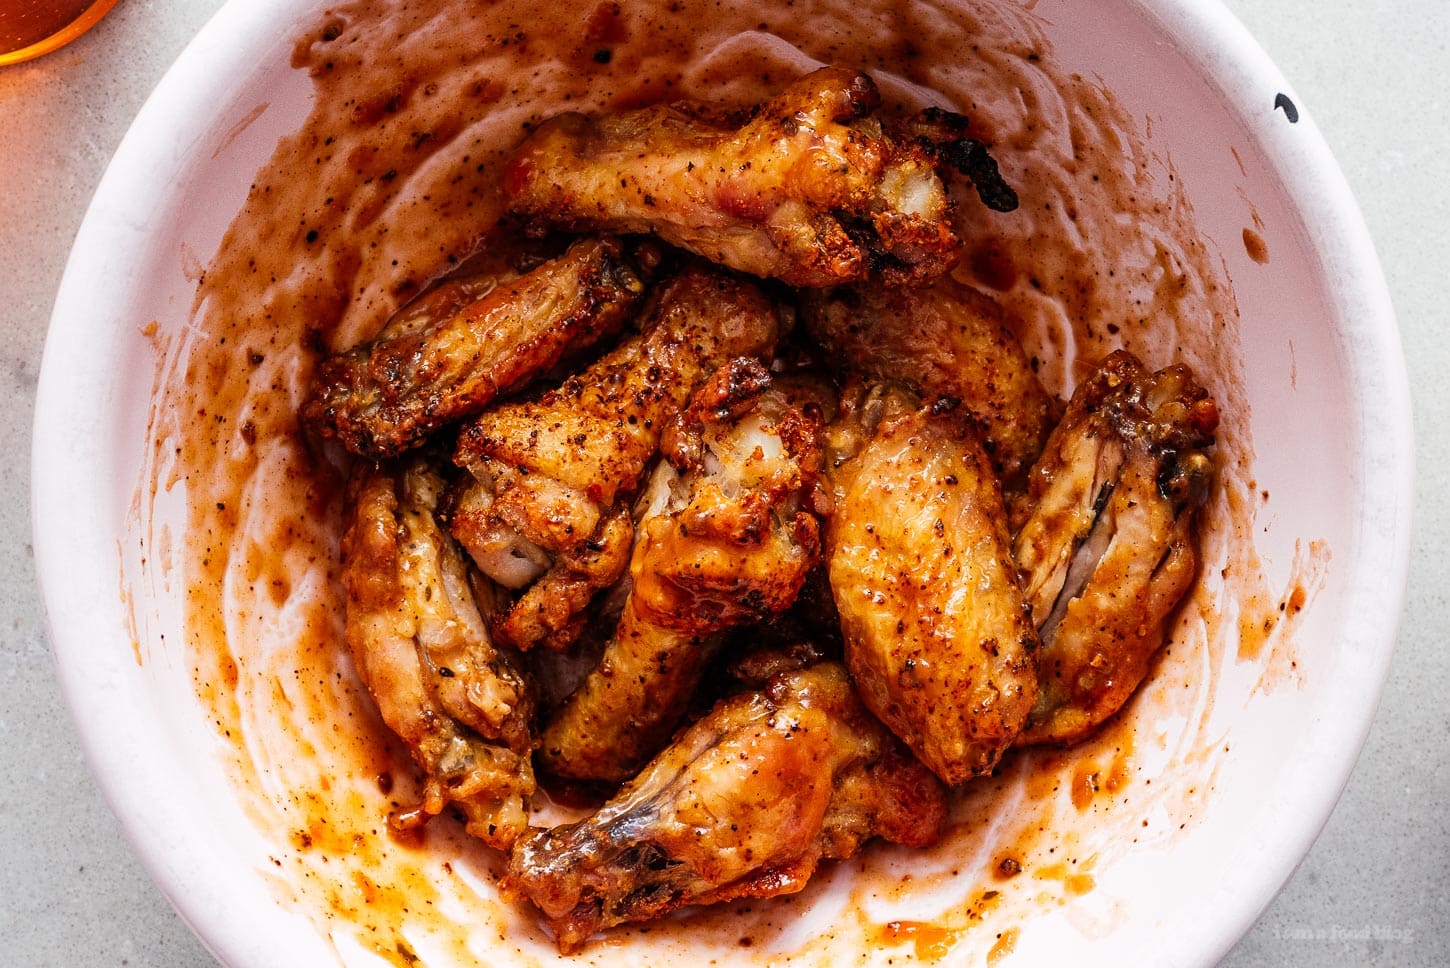 stir-fried chicken wings in spicy sauce |  www.iamafoodblog.com